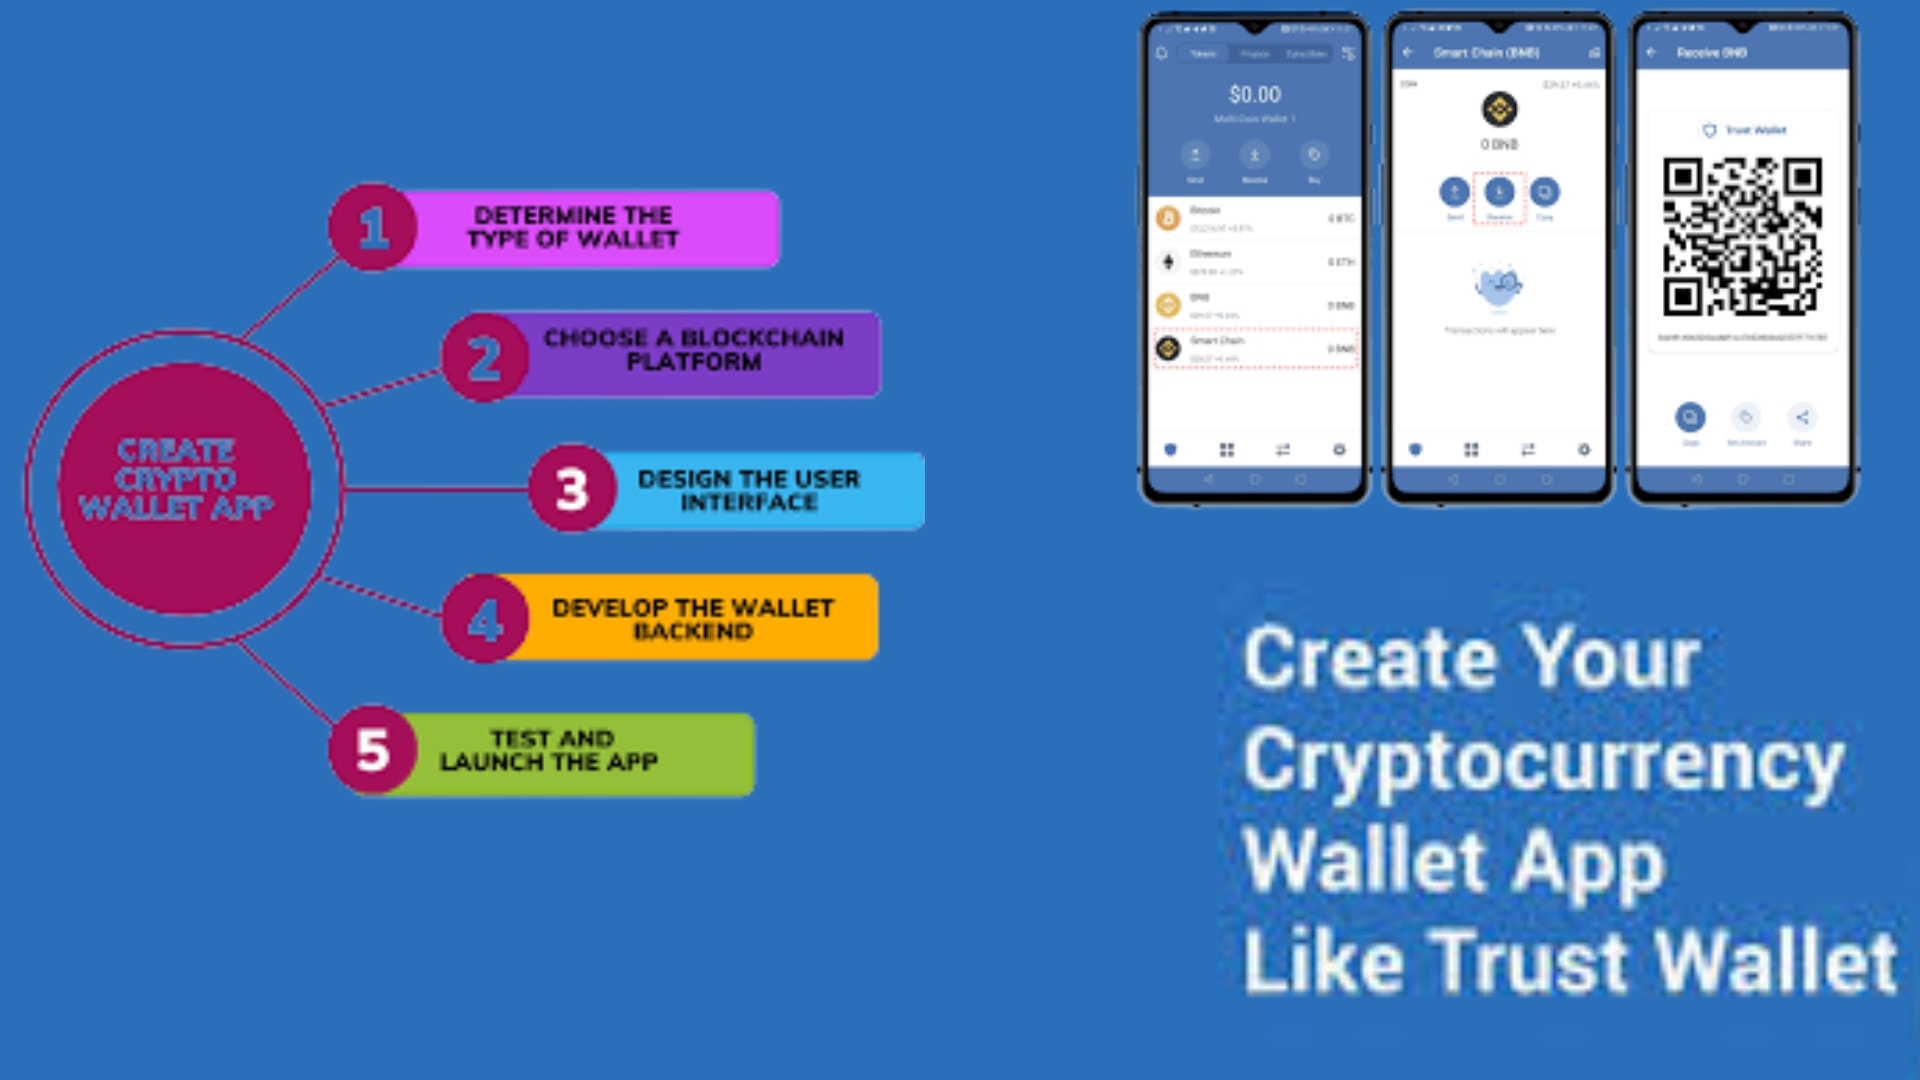 How to Create Cryptocurrency Wallet App [Step-by-Step Guide]